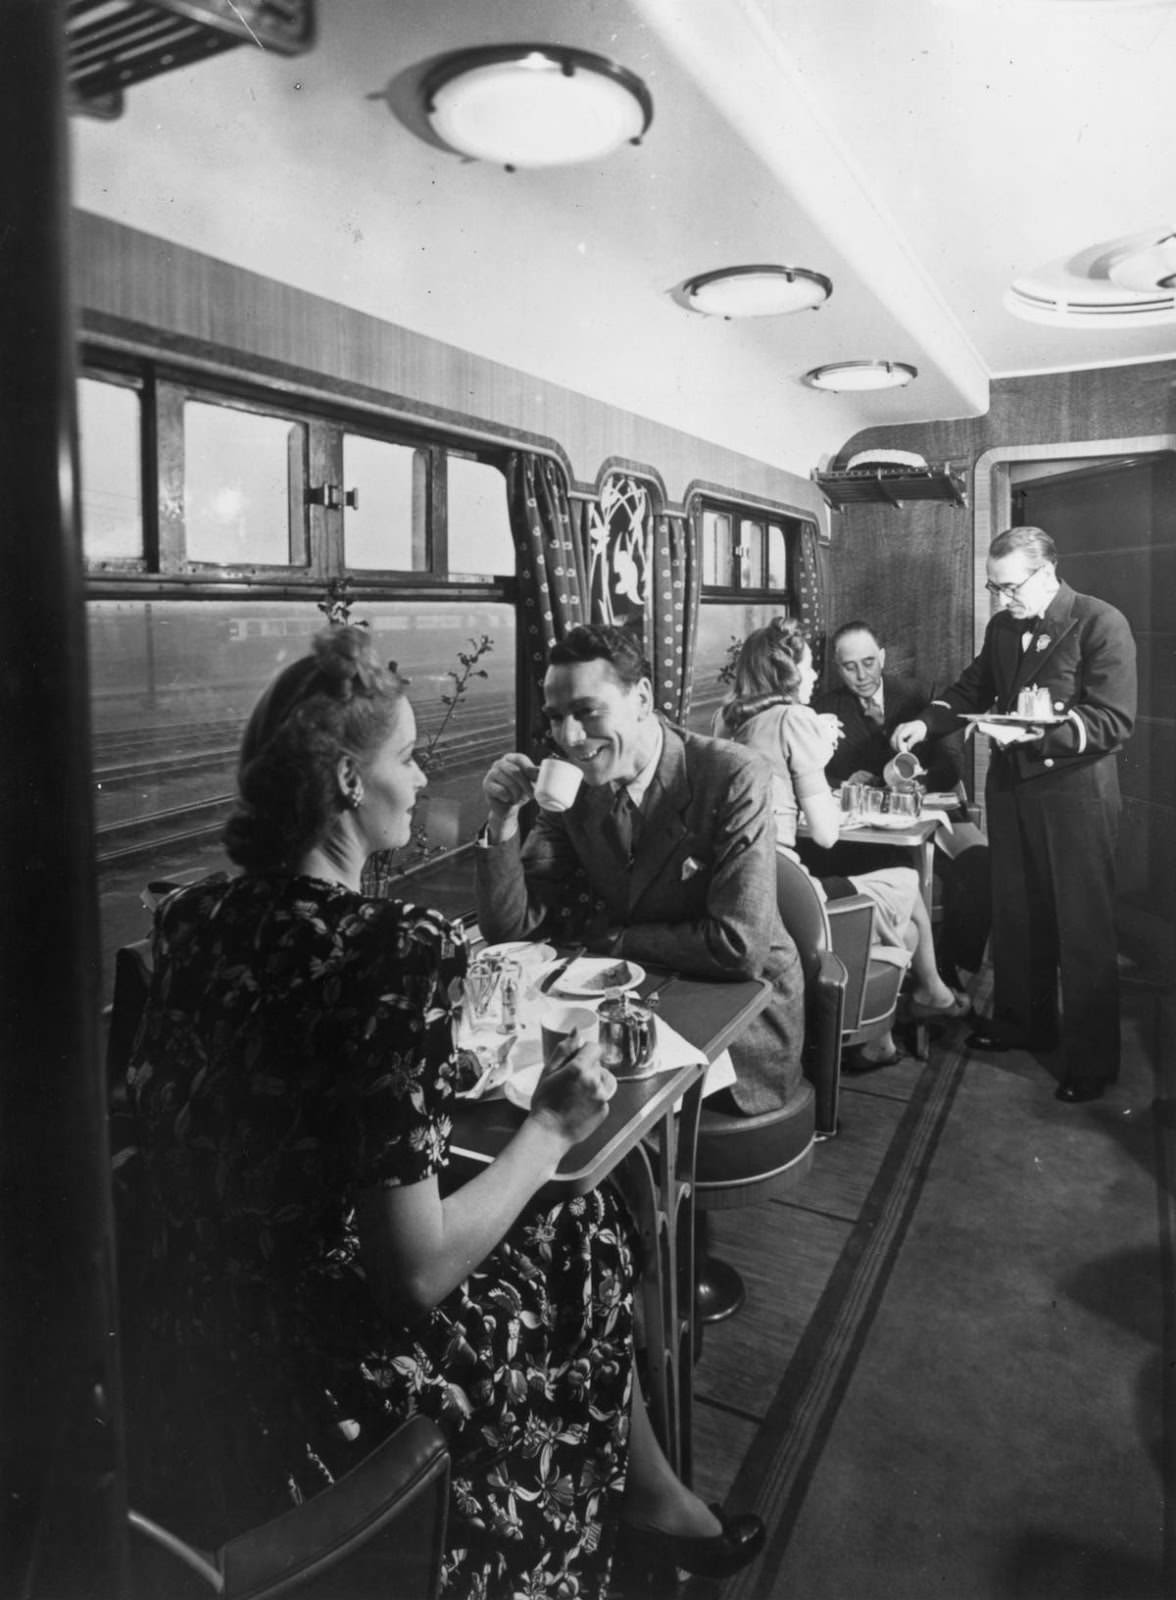 Diners in the restaurant car on a GWR (Great Western Railway) oil-fired locomotive, 1946.